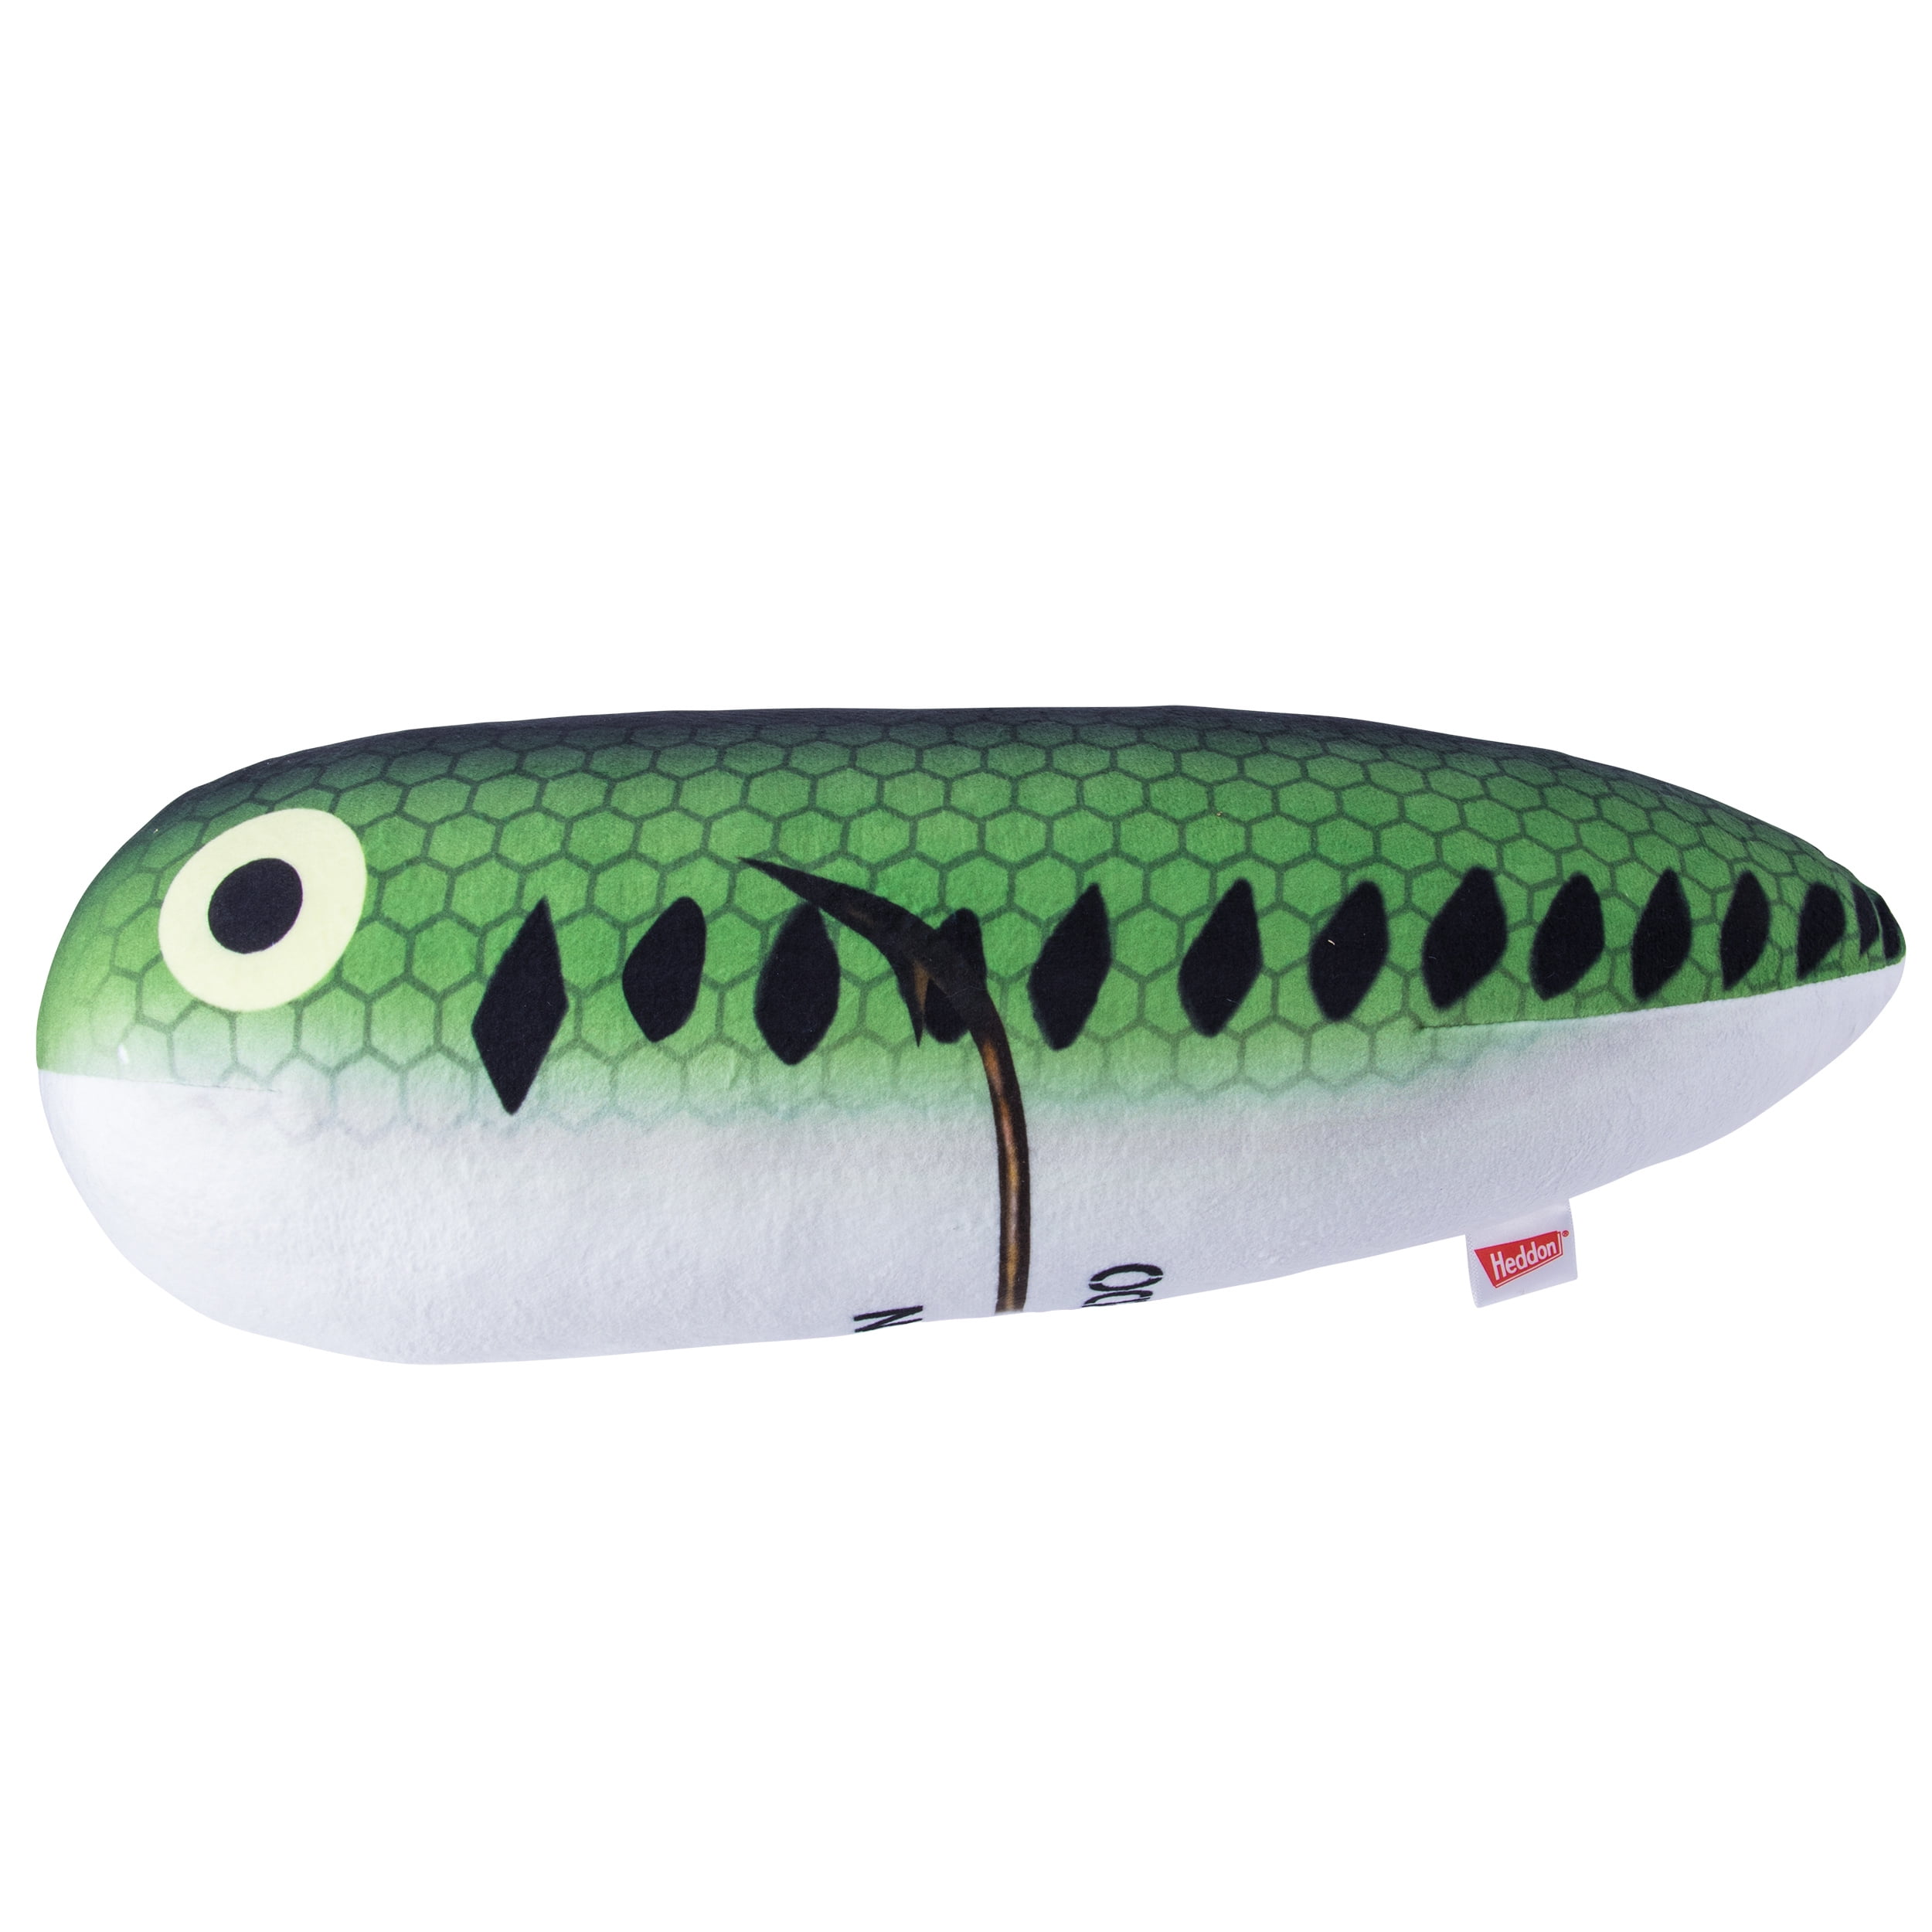 Mann's Bait Company Little George Fishing Lure, Chartreuse, 0.5 Oz. 